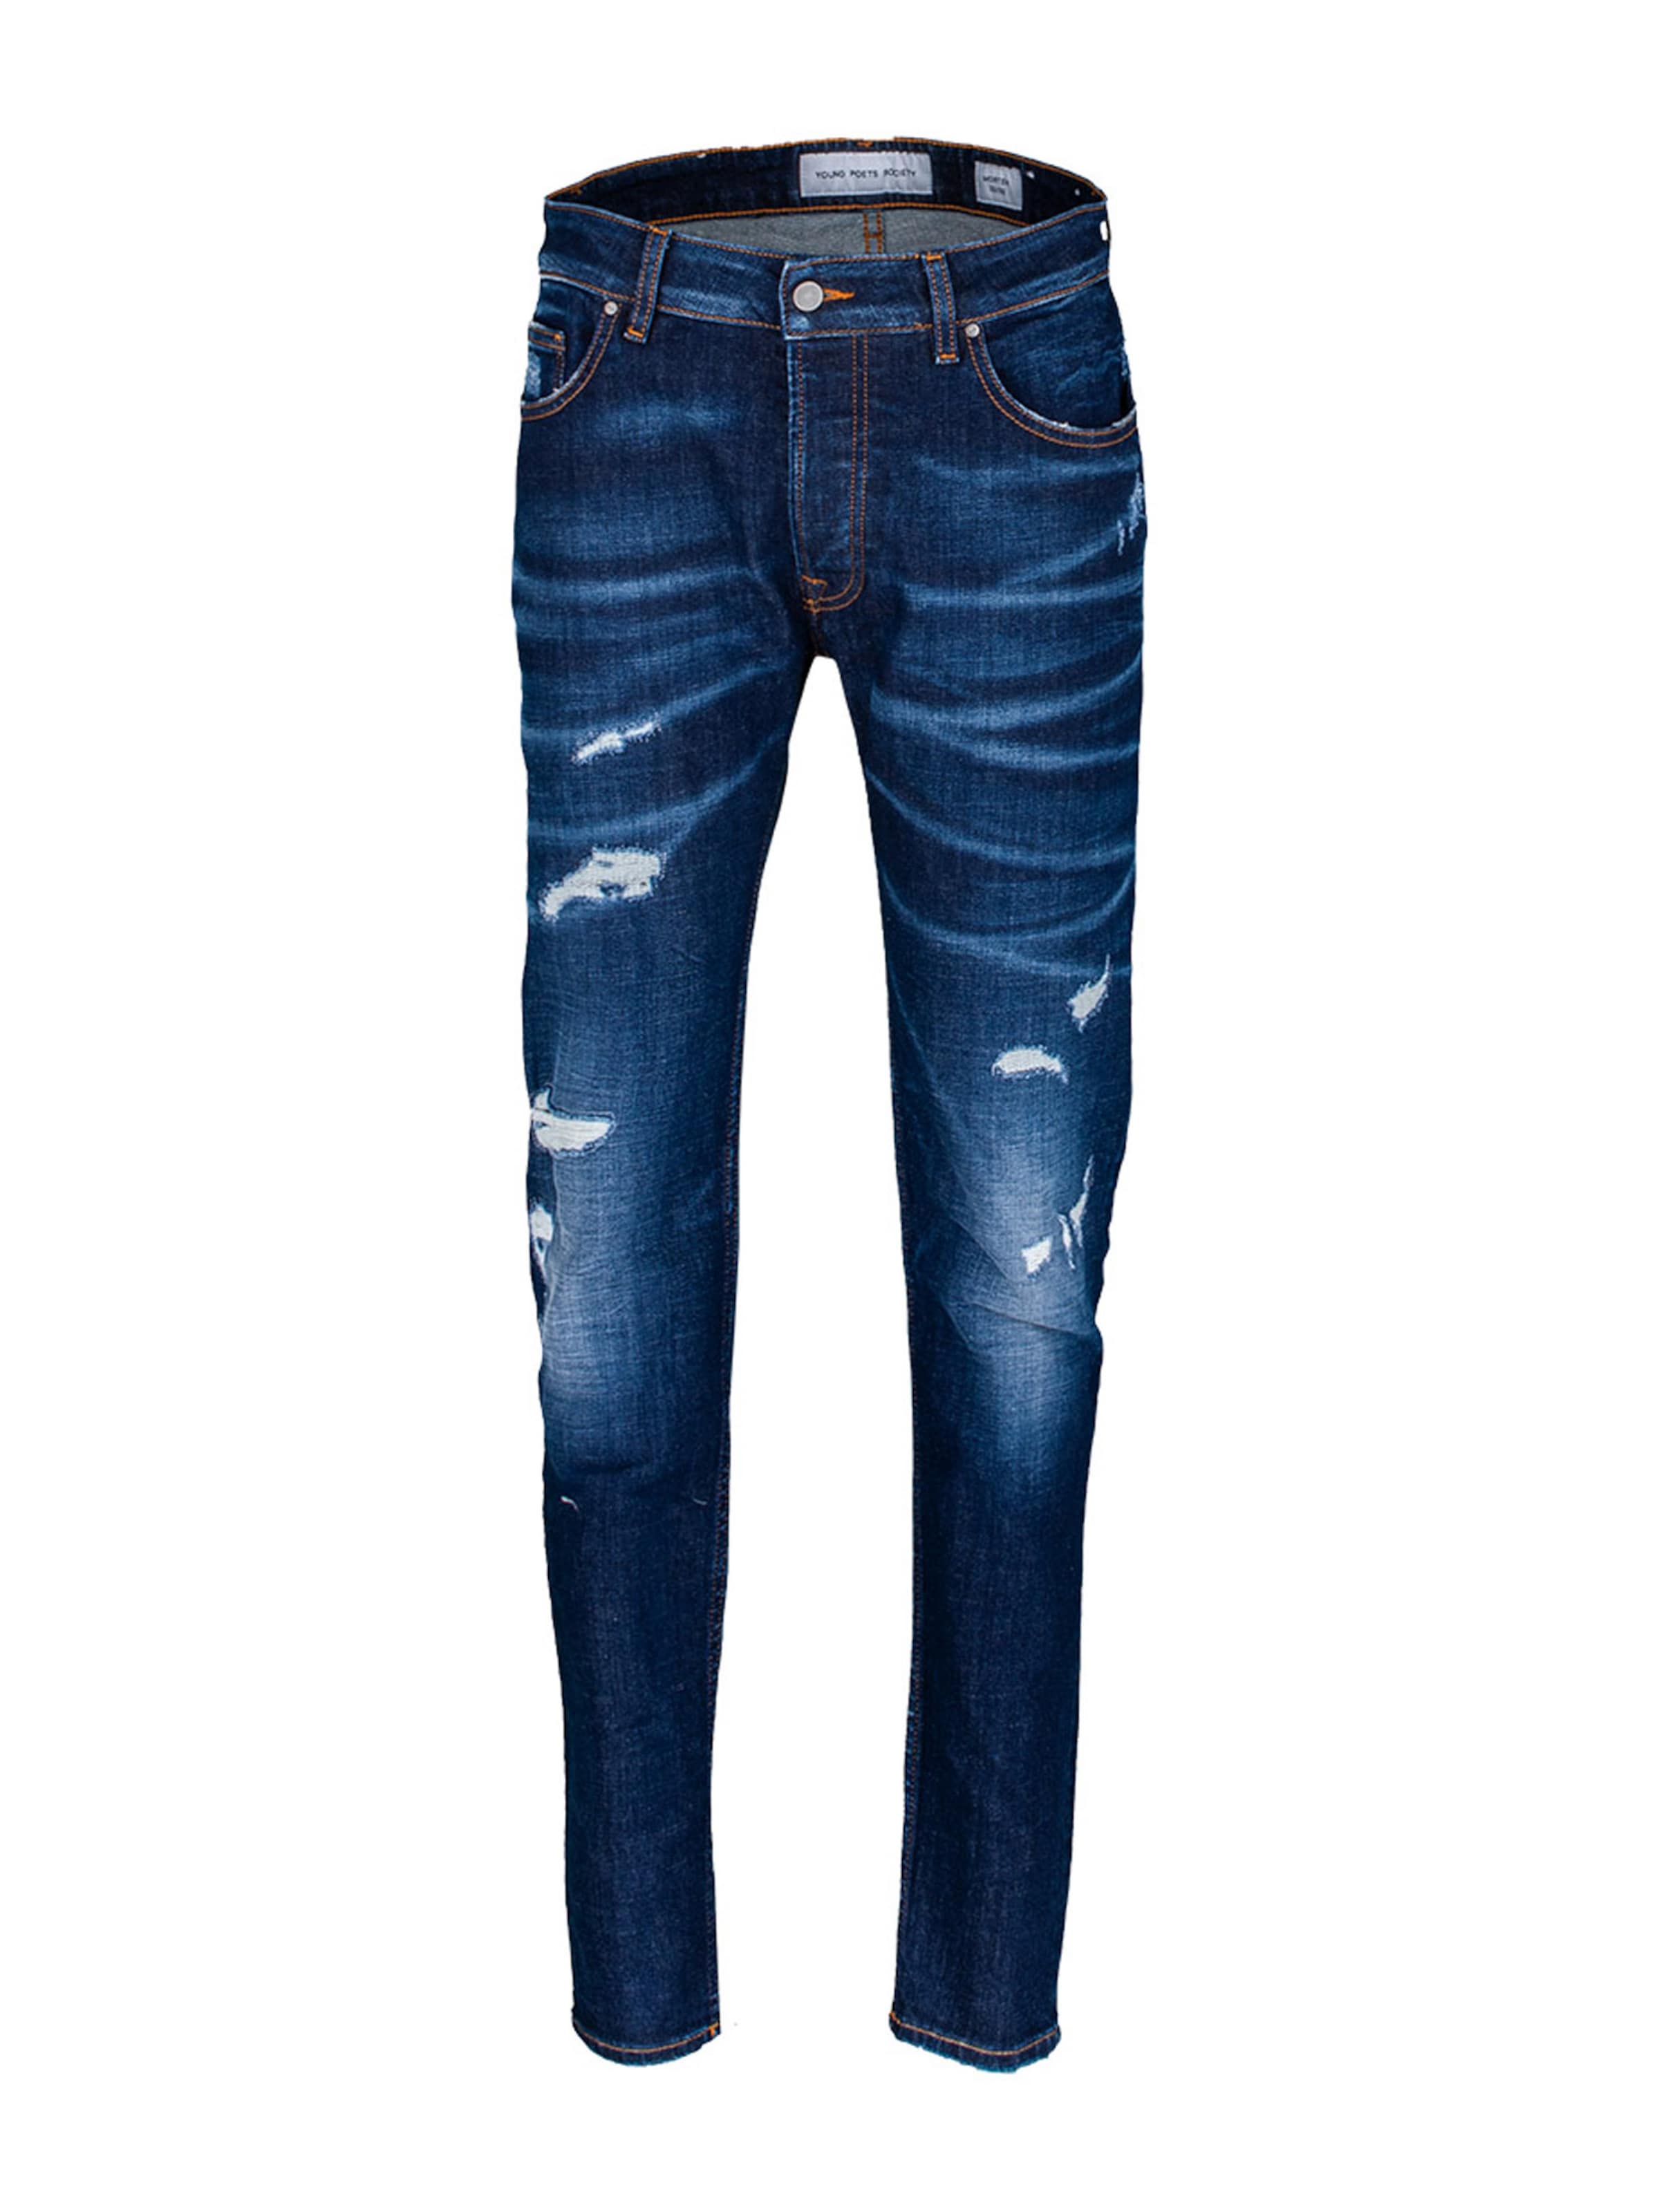 Uomo Jeans Young Poets Society Jeans Morten in Blu Scuro 